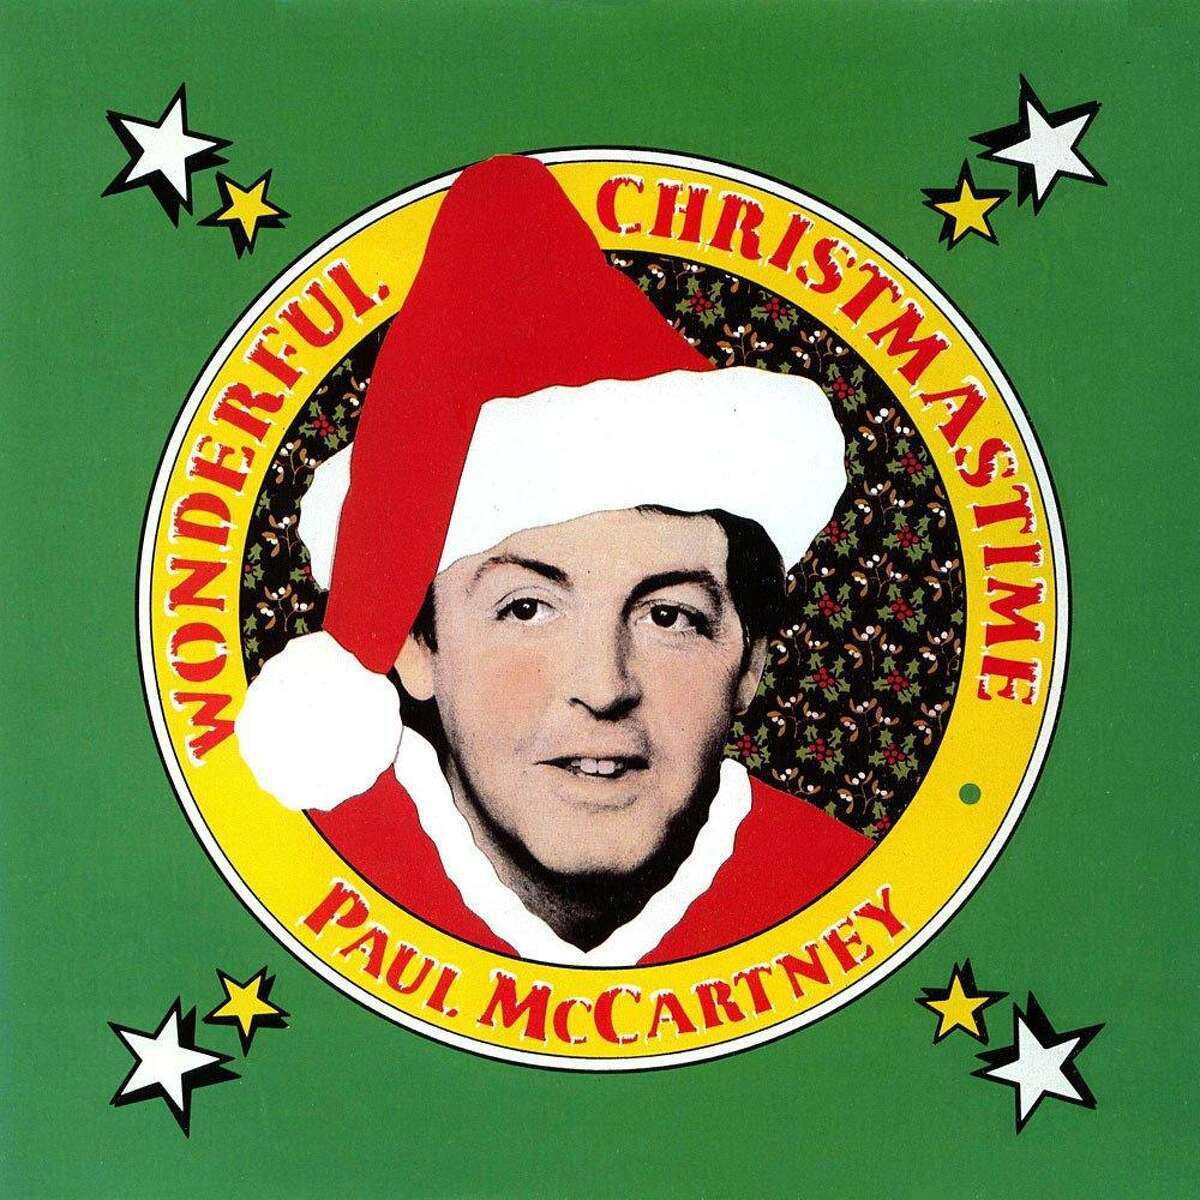 Paul McCartney has one of the more recent holiday perennials with “Simply Having a Wonderful Christmastime.”